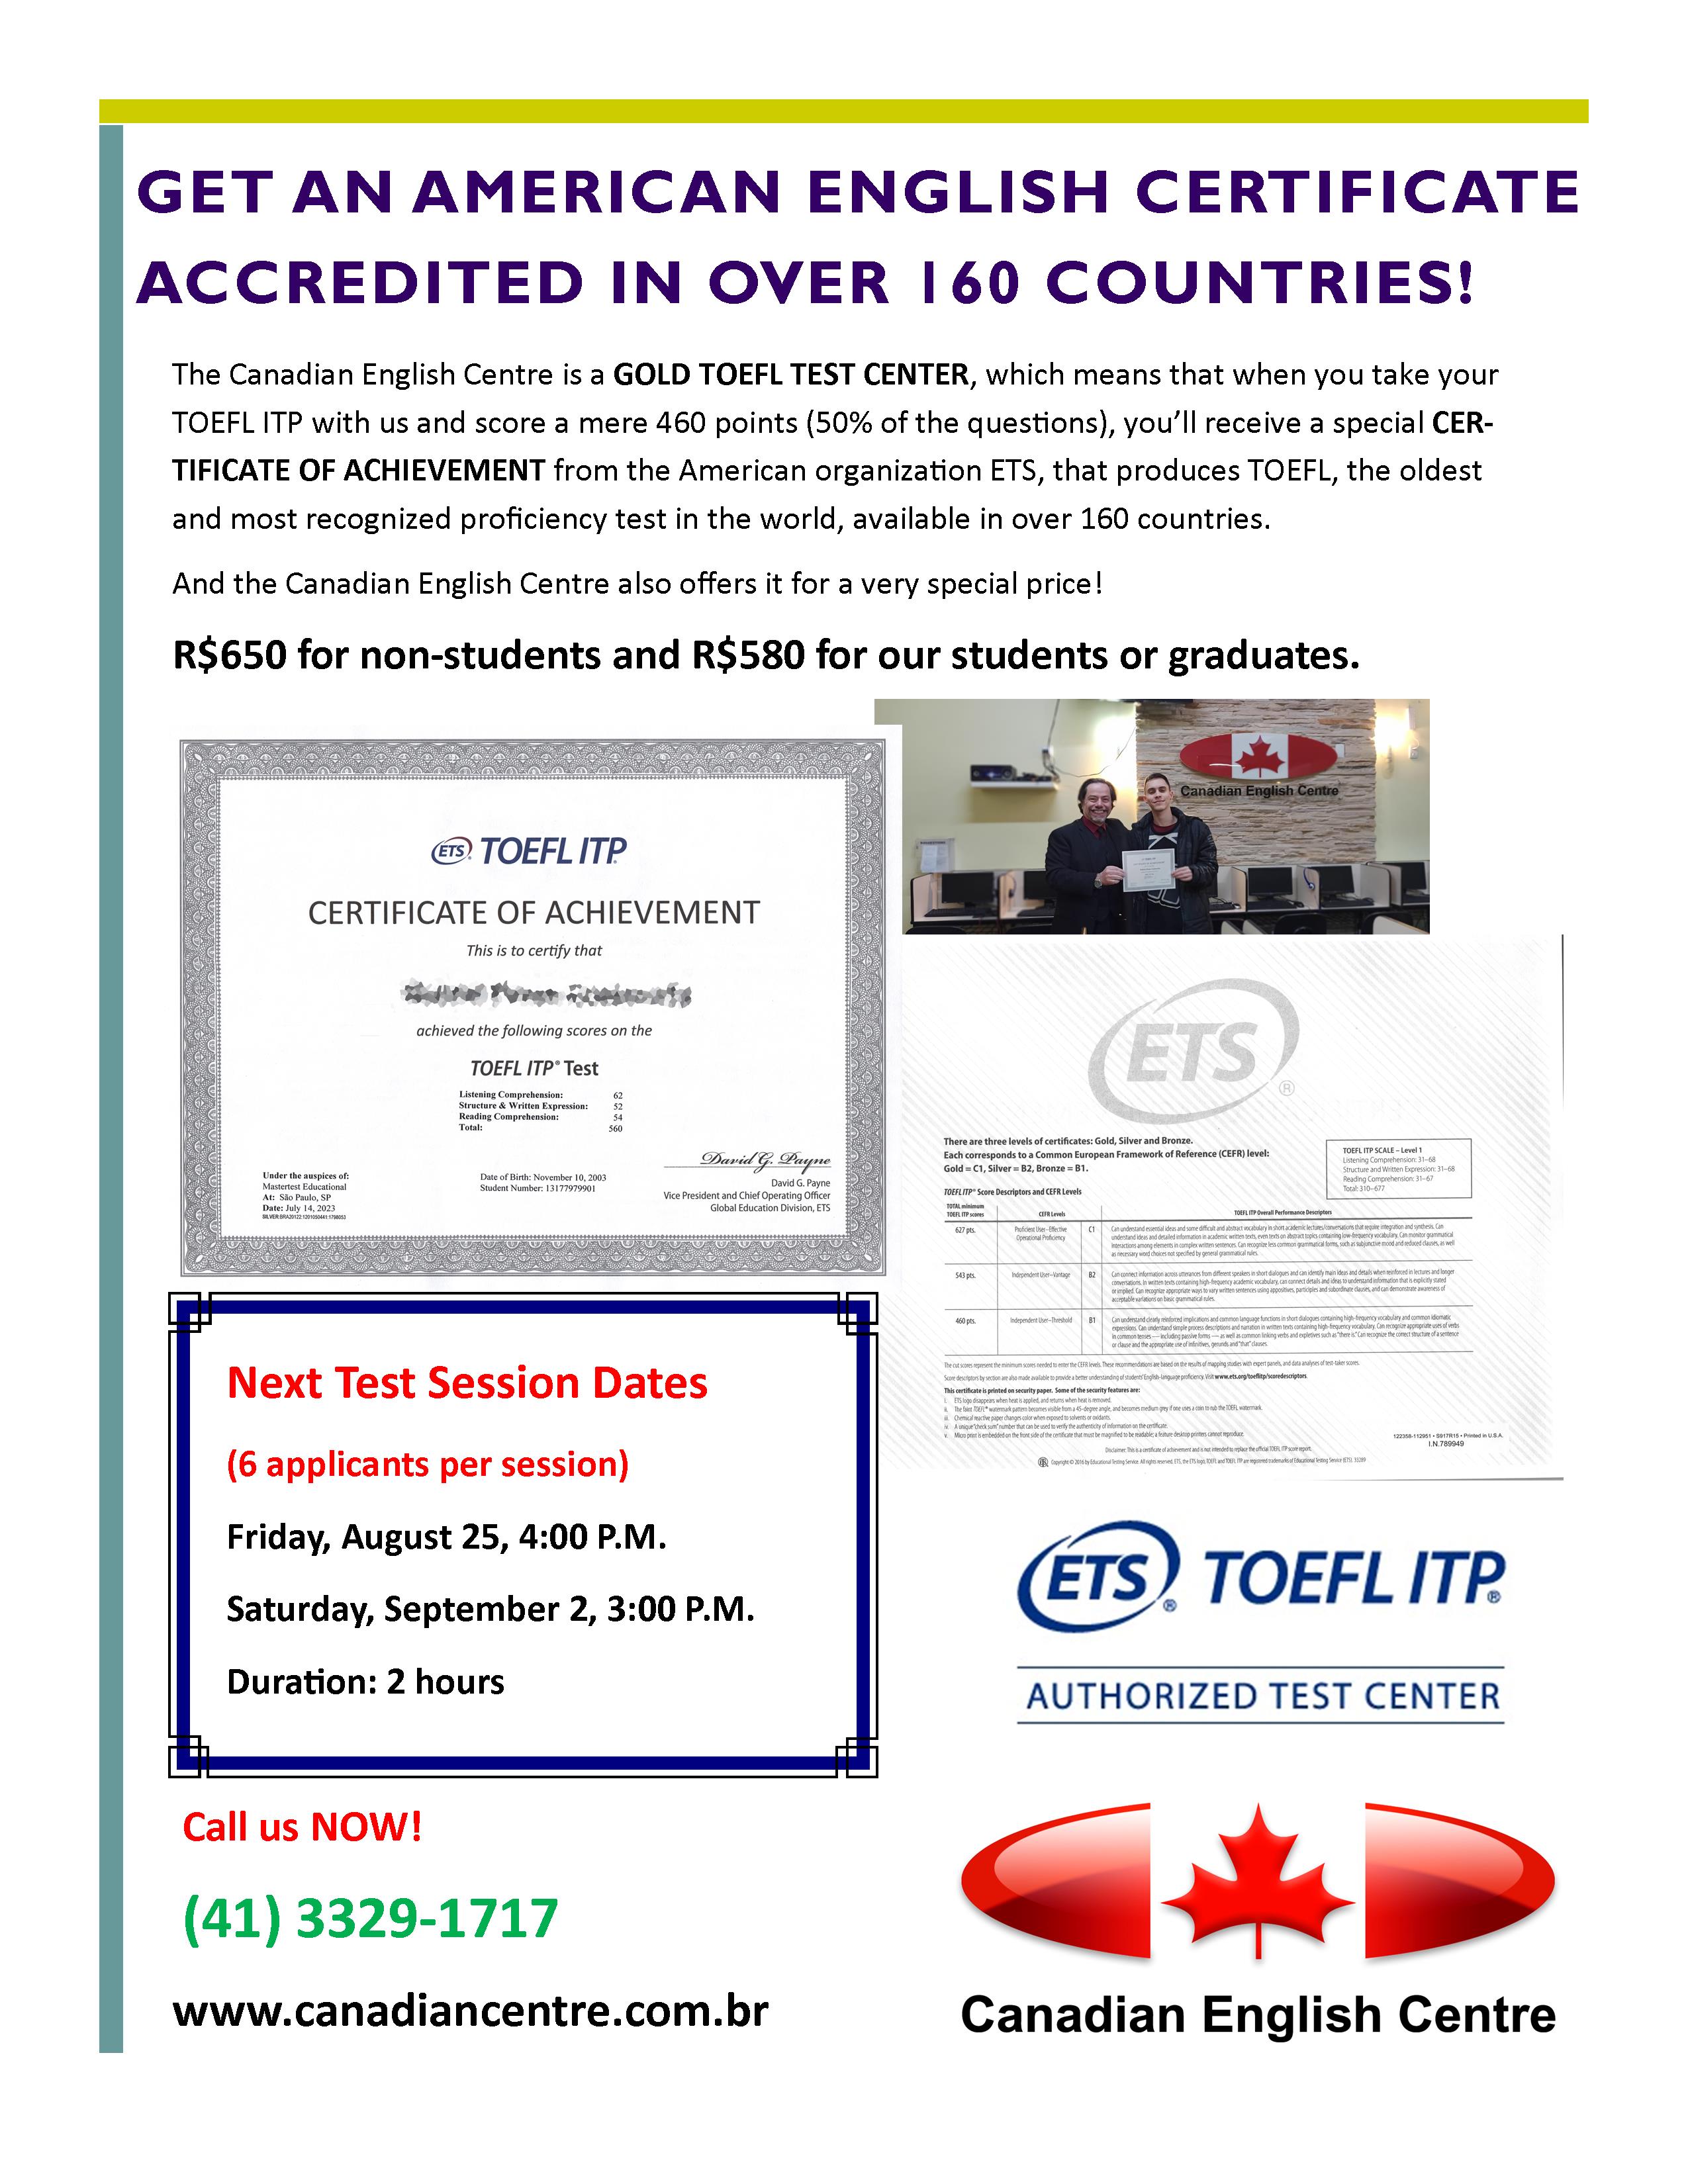 Get your INTERNATIONAL ENGLISH CERTIFICATE now! Check out our TOEFL test schedule for this semester!